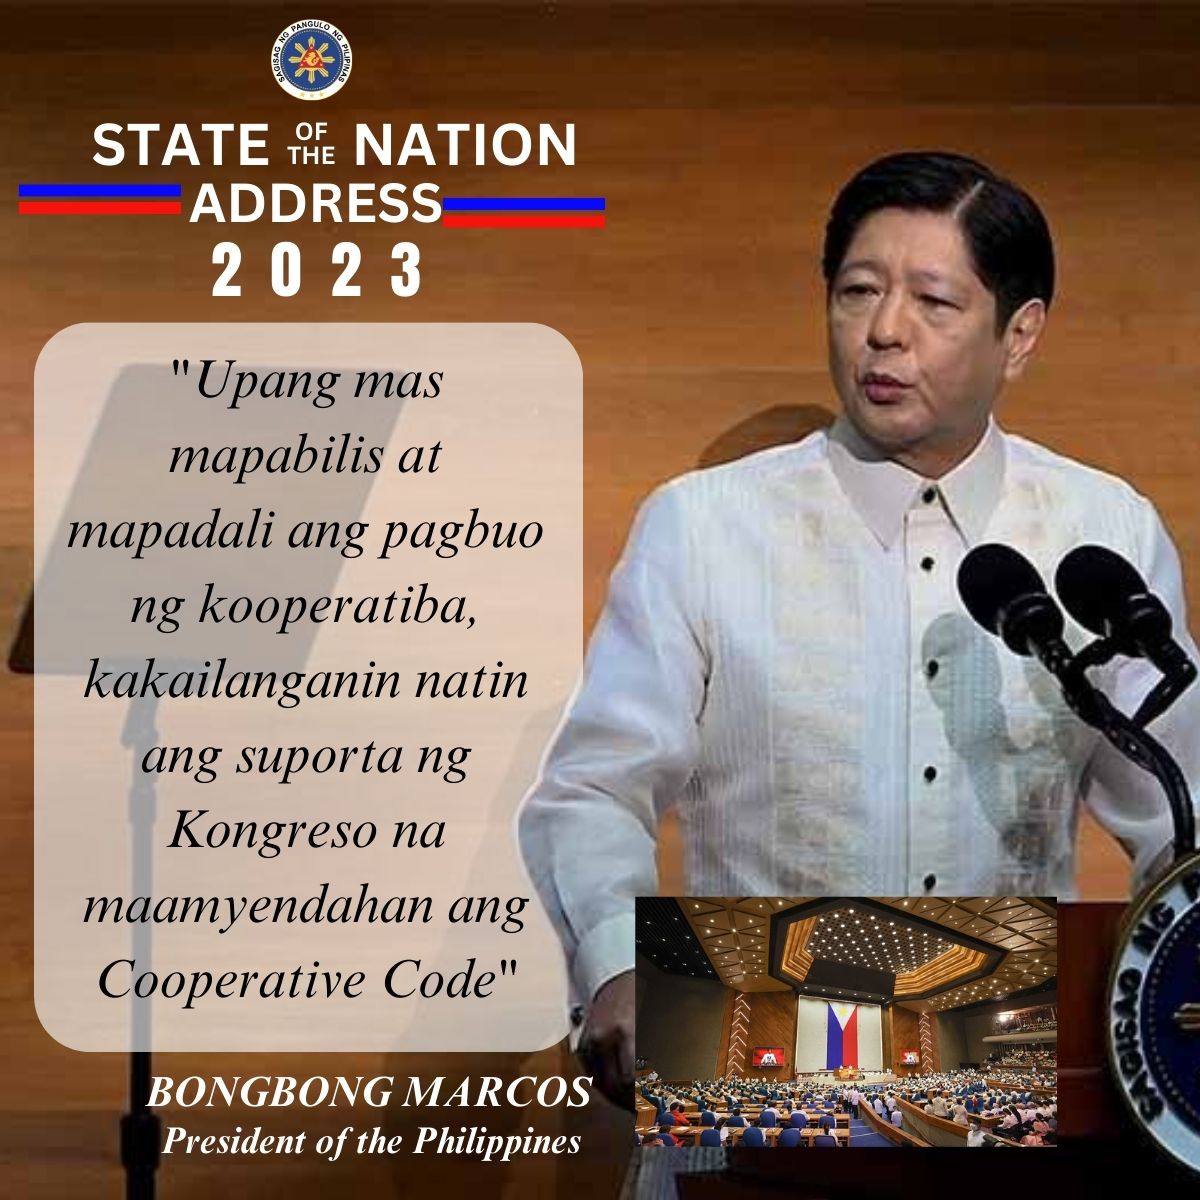 President Bongbong Marcos calls the support of the Congress to amend  the Cooperative Code in his Second State of the Nation Address